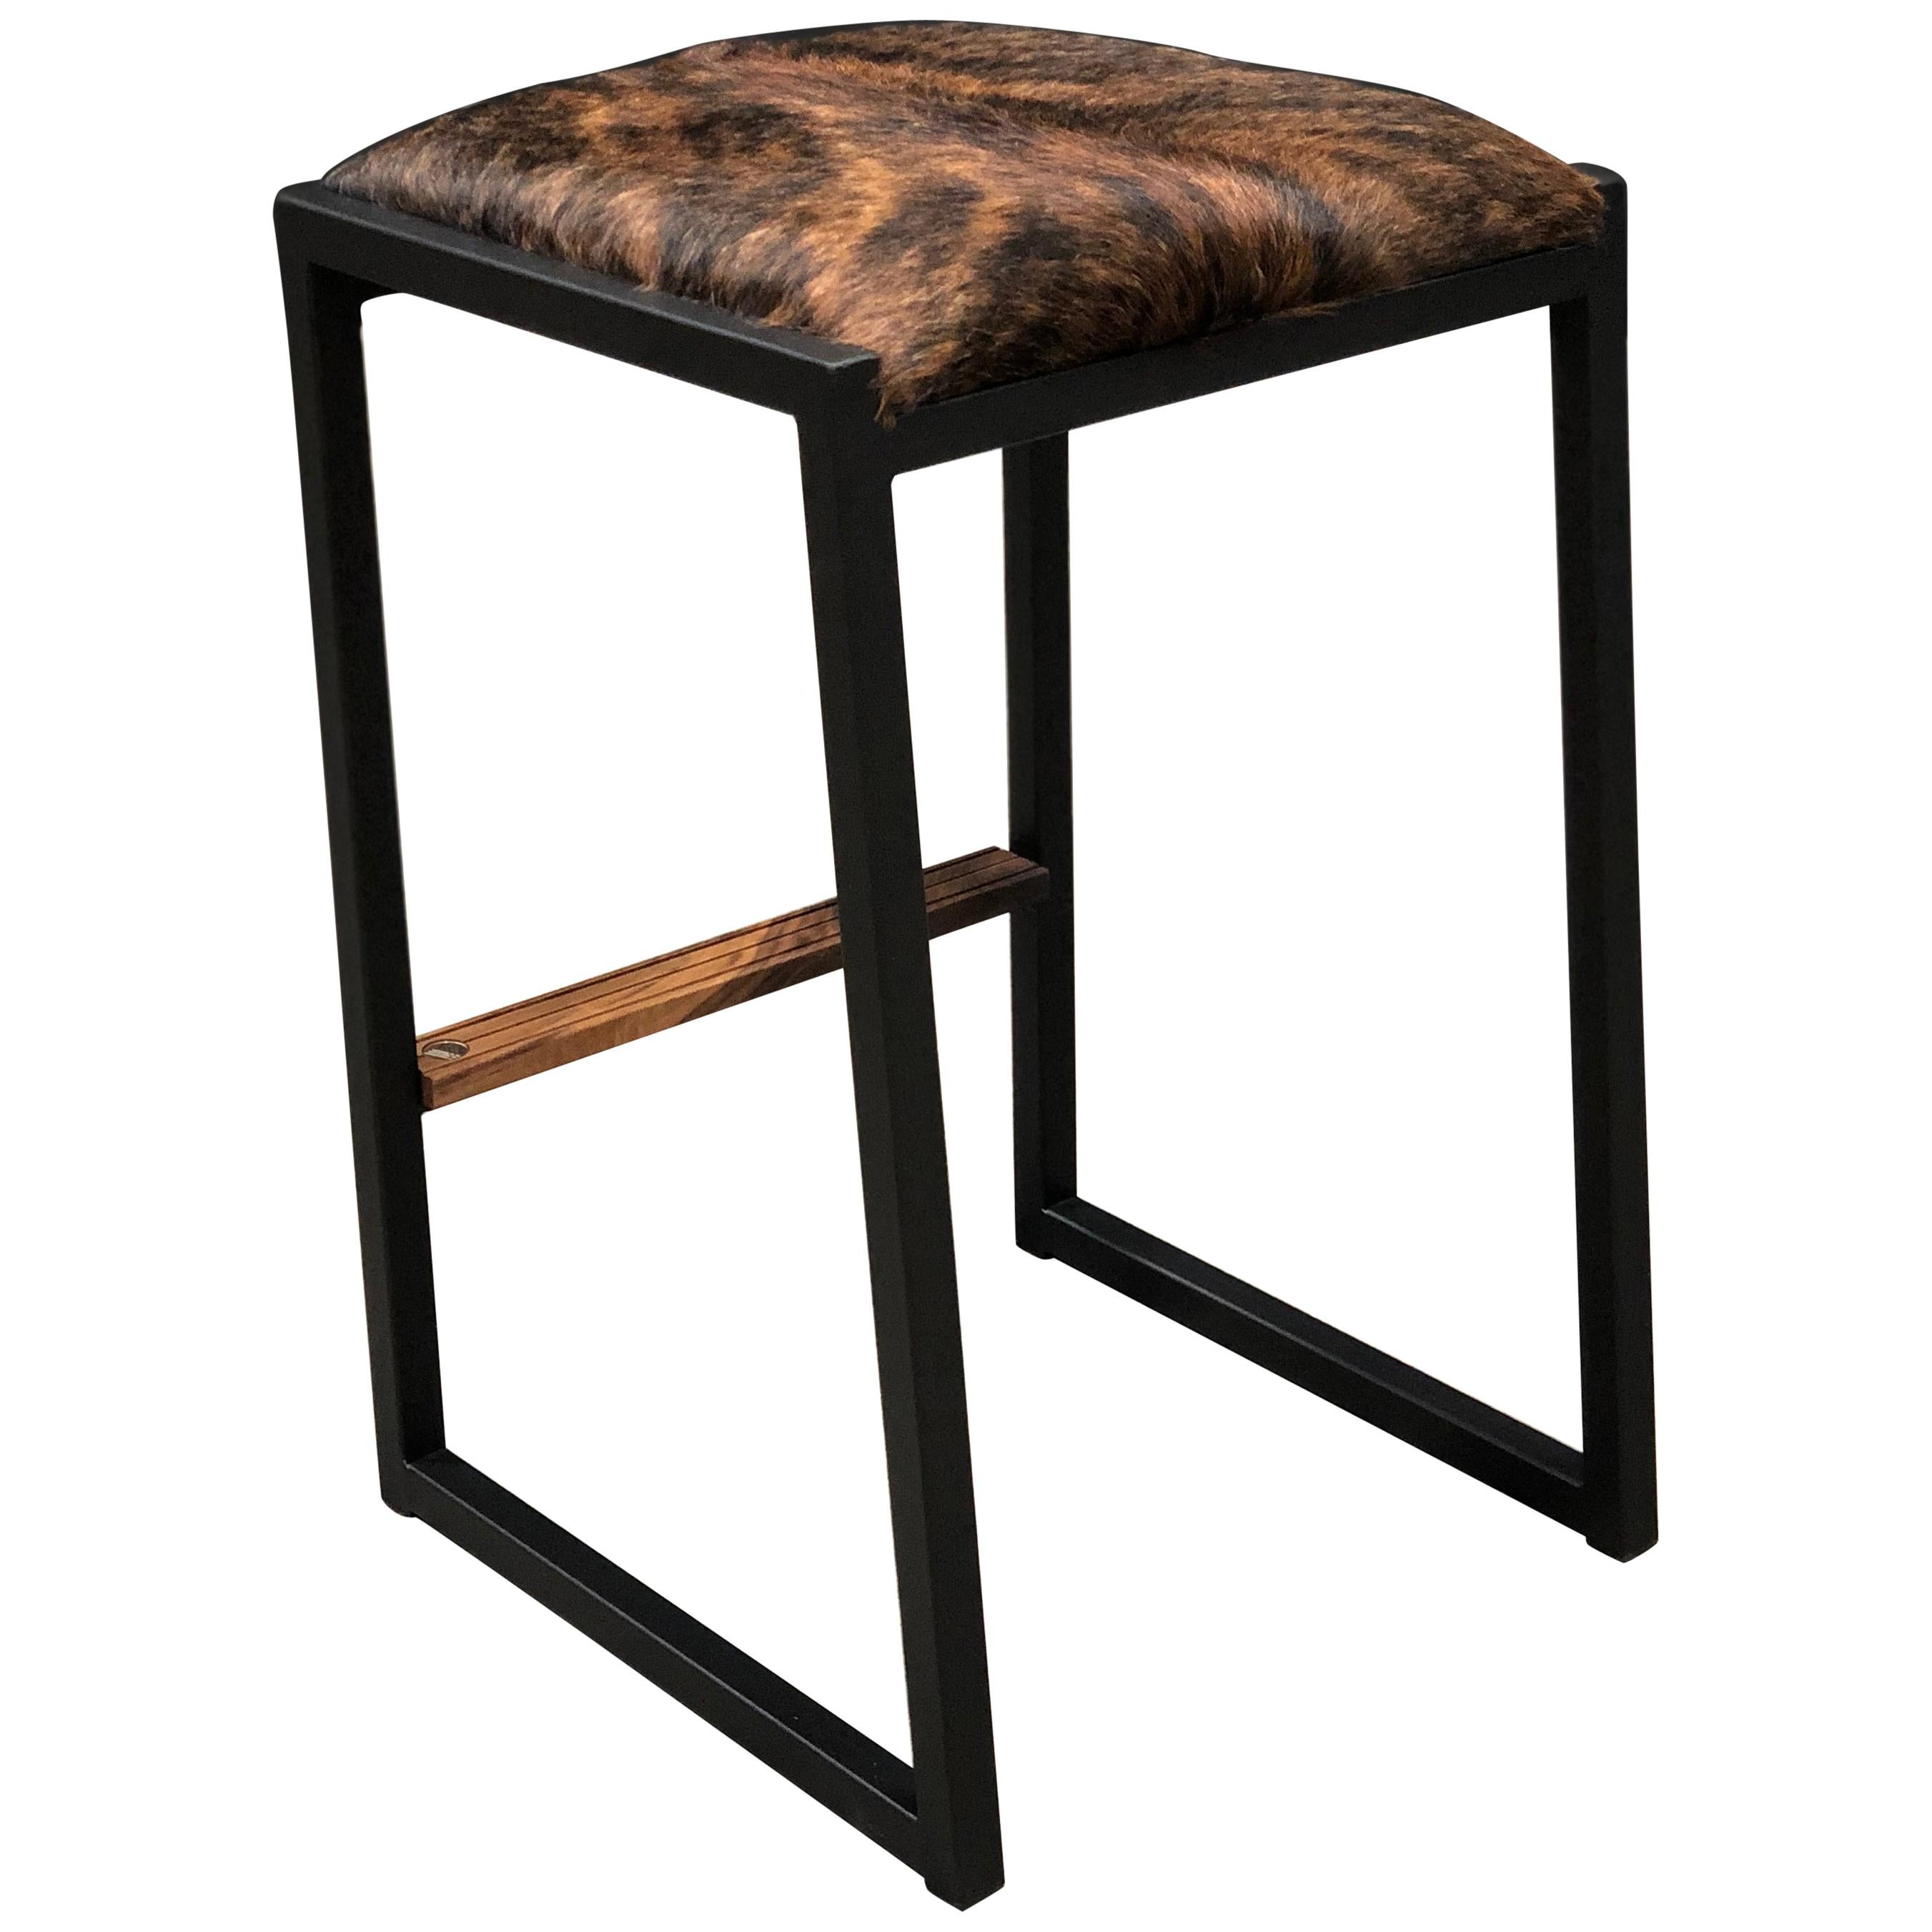 Shaker Backless Counter Stool by Ambrozia, Walnut, Steel, Brown Brindle Cowhide For Sale